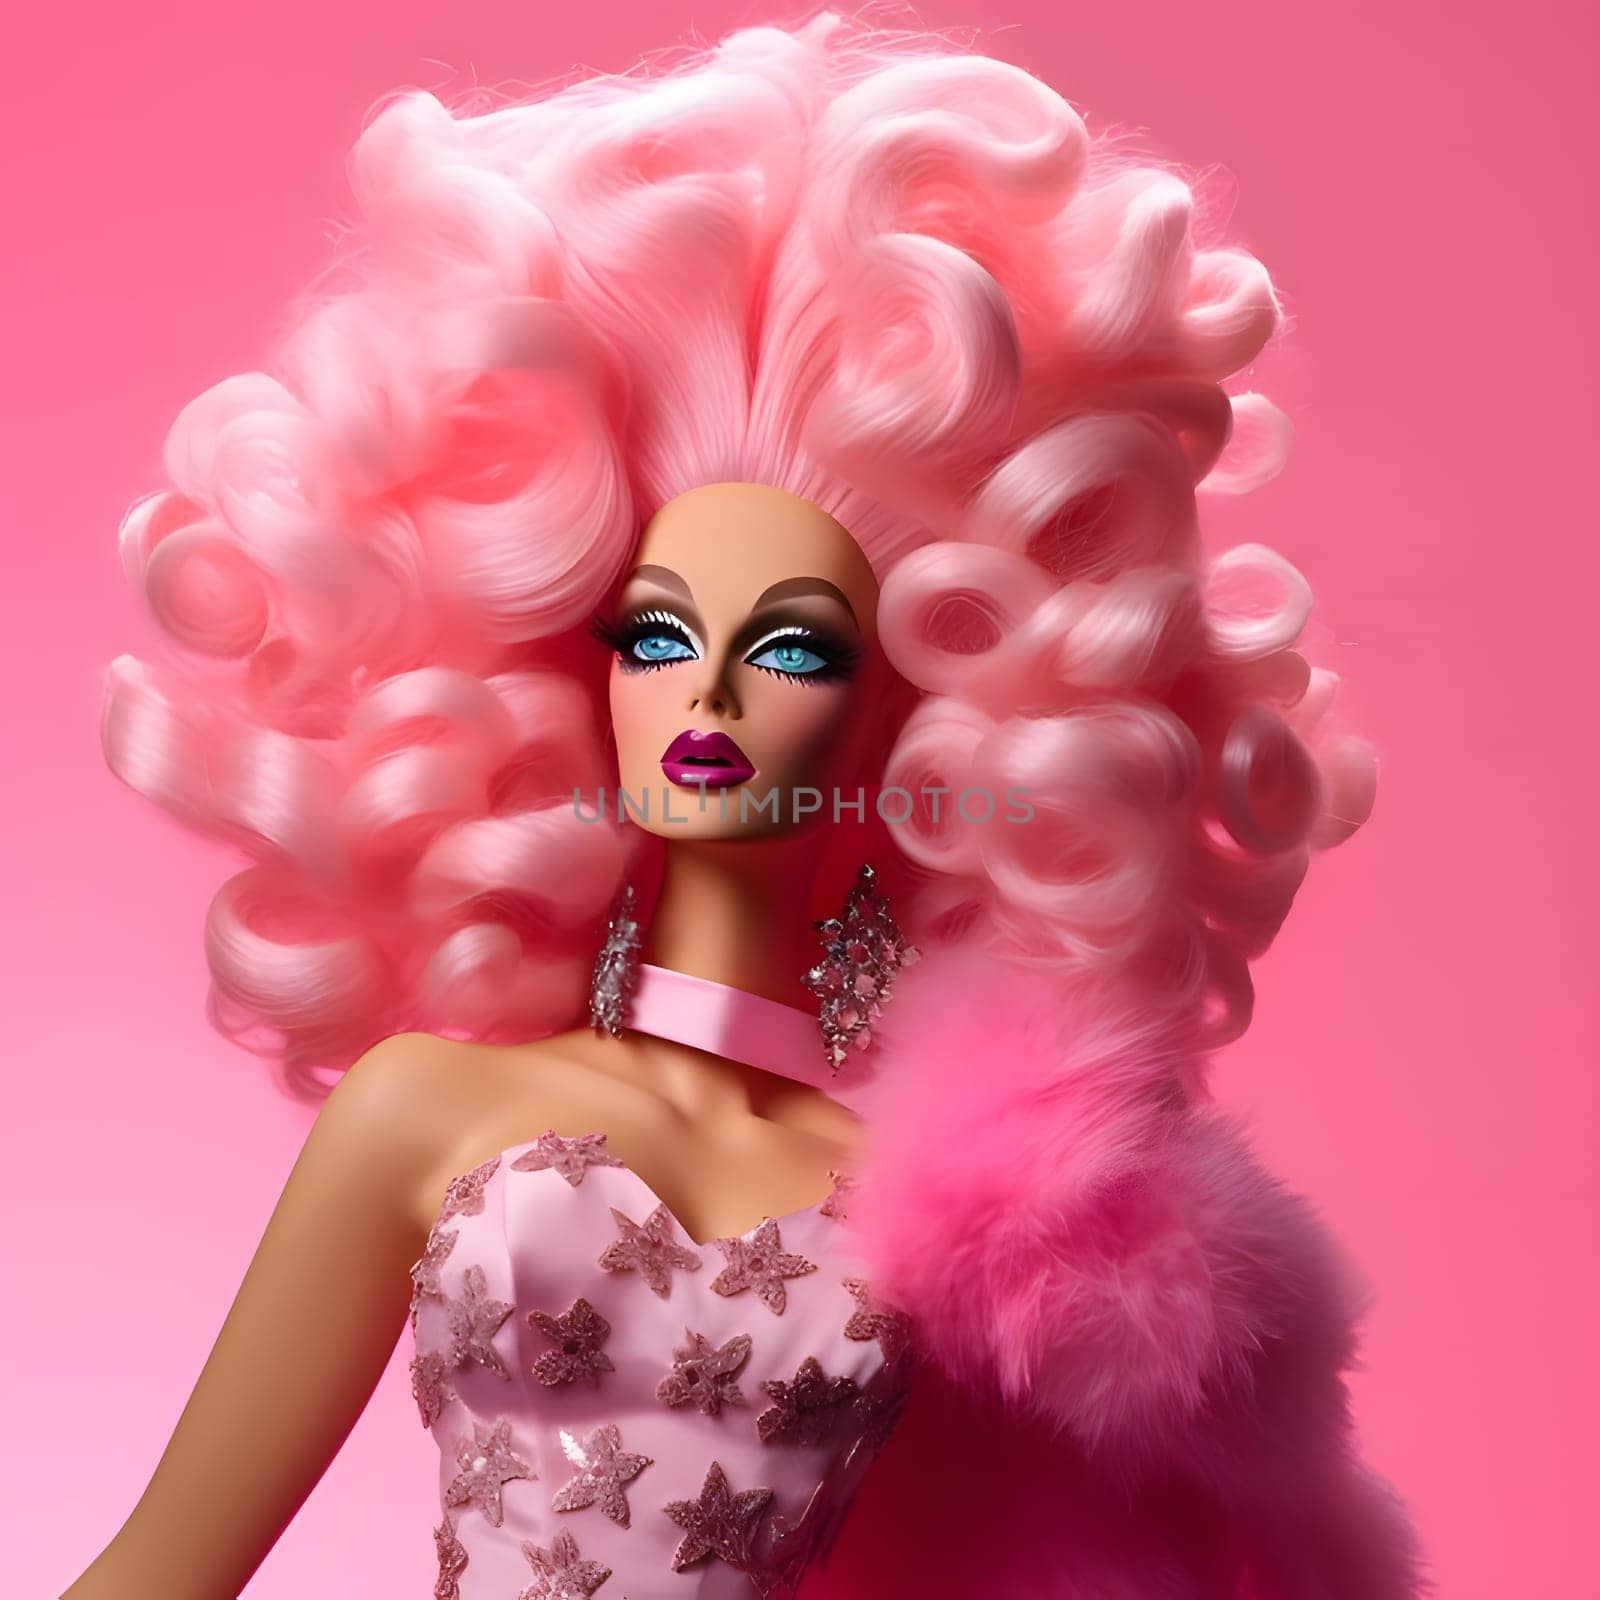 The caricature of Barbie showcases her in a vibrant pink outfit, and her hair is depicted in a comically exaggerated, huge style, adding a fun and playful touch to her appearance.